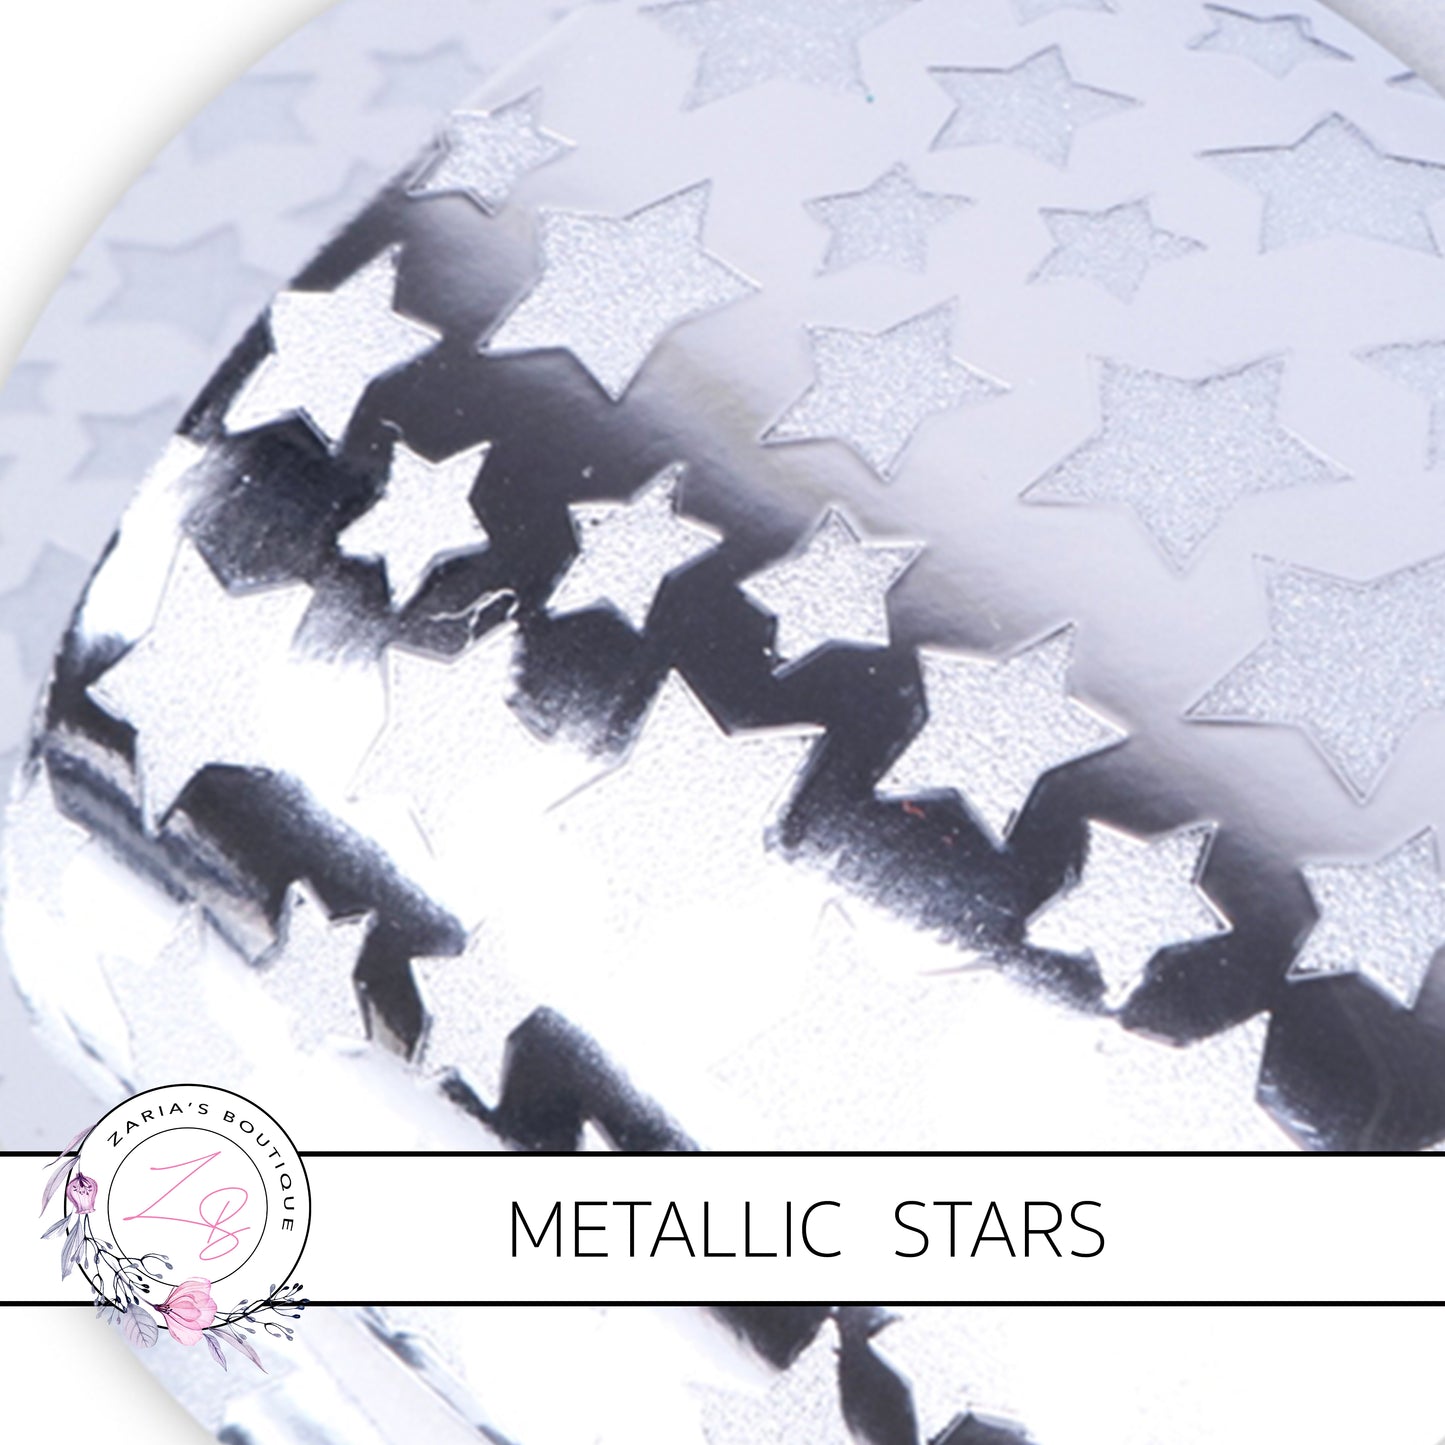 Metallic Stars ~ Faux Leather ~ Red, Rose Gold & Silver